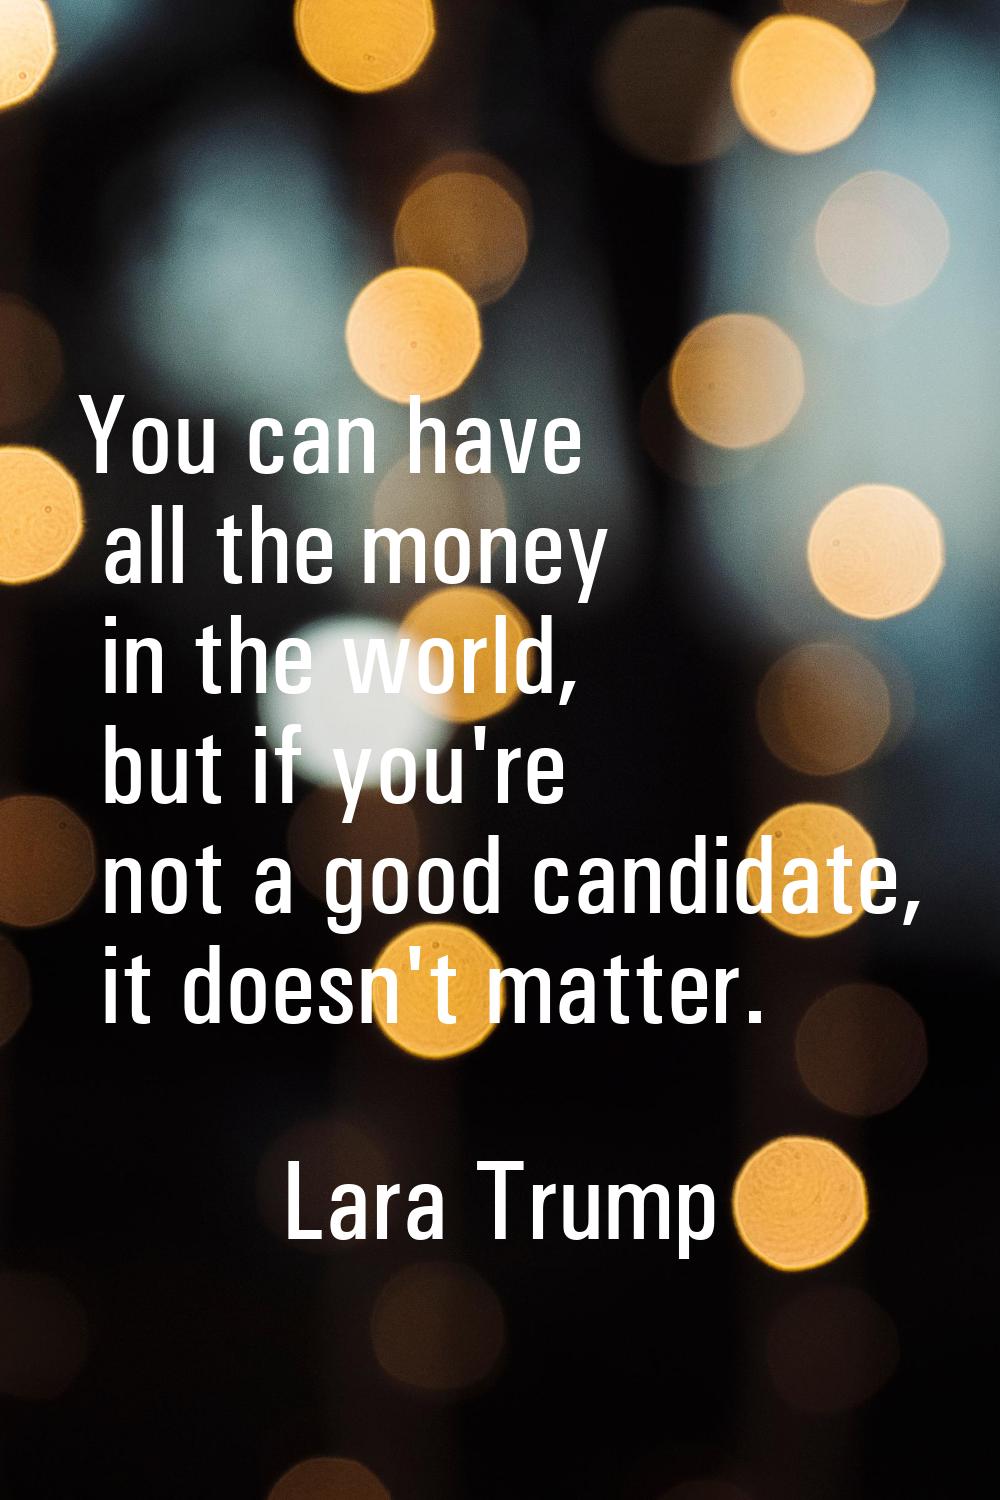 You can have all the money in the world, but if you're not a good candidate, it doesn't matter.